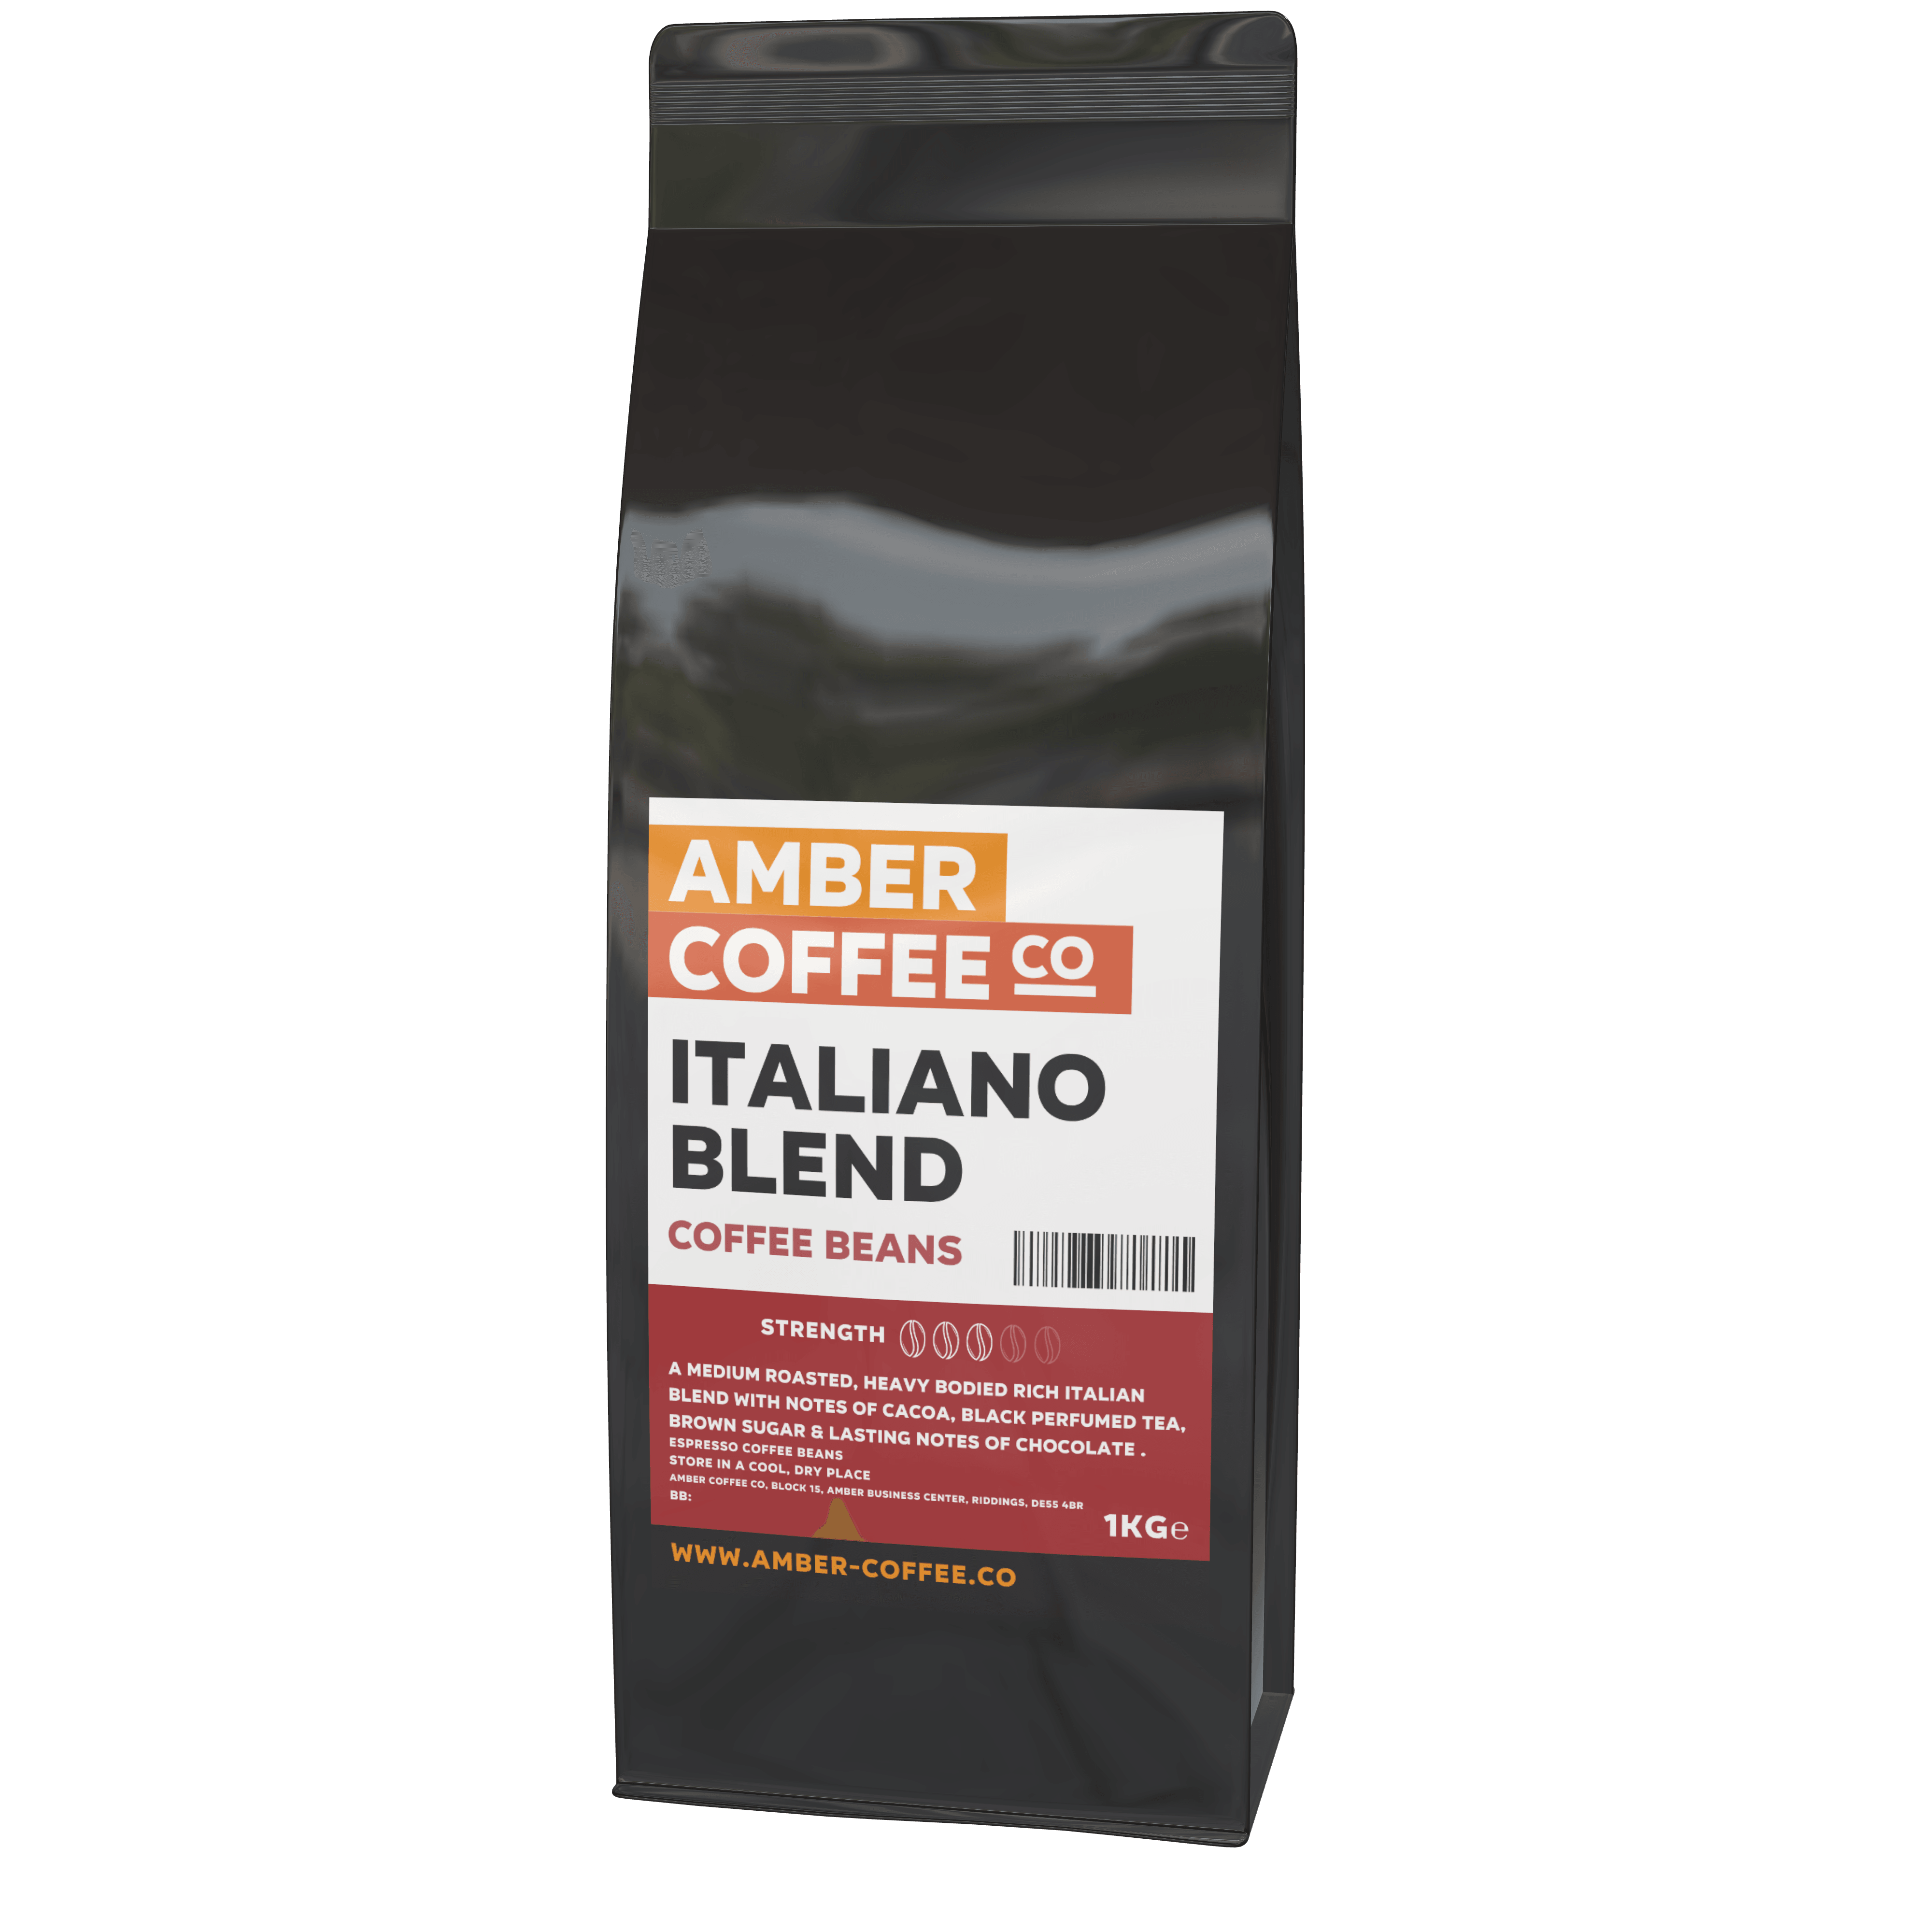 Amber Coffee Co - Italiano Blend - Premium Coffee Beans (Full Case or 1KG Bags) - Vending Superstore